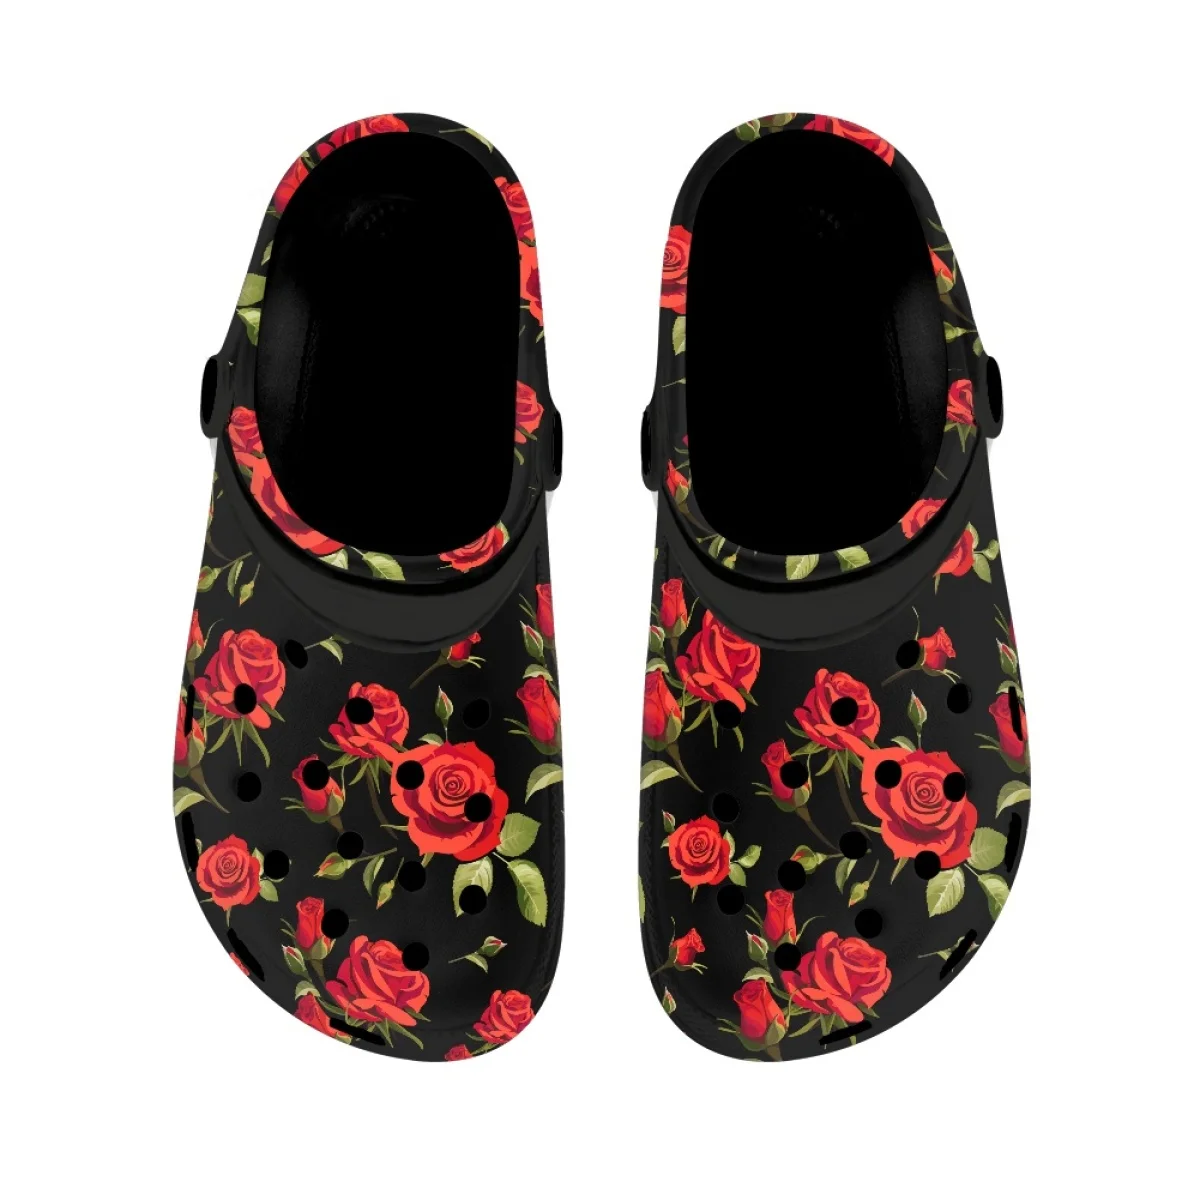 Red Rose Printing Comfortable Breathable Sandals Female Valentine's Day Anniversary Gift Fashion Casual Indoor Outdoor Slippers